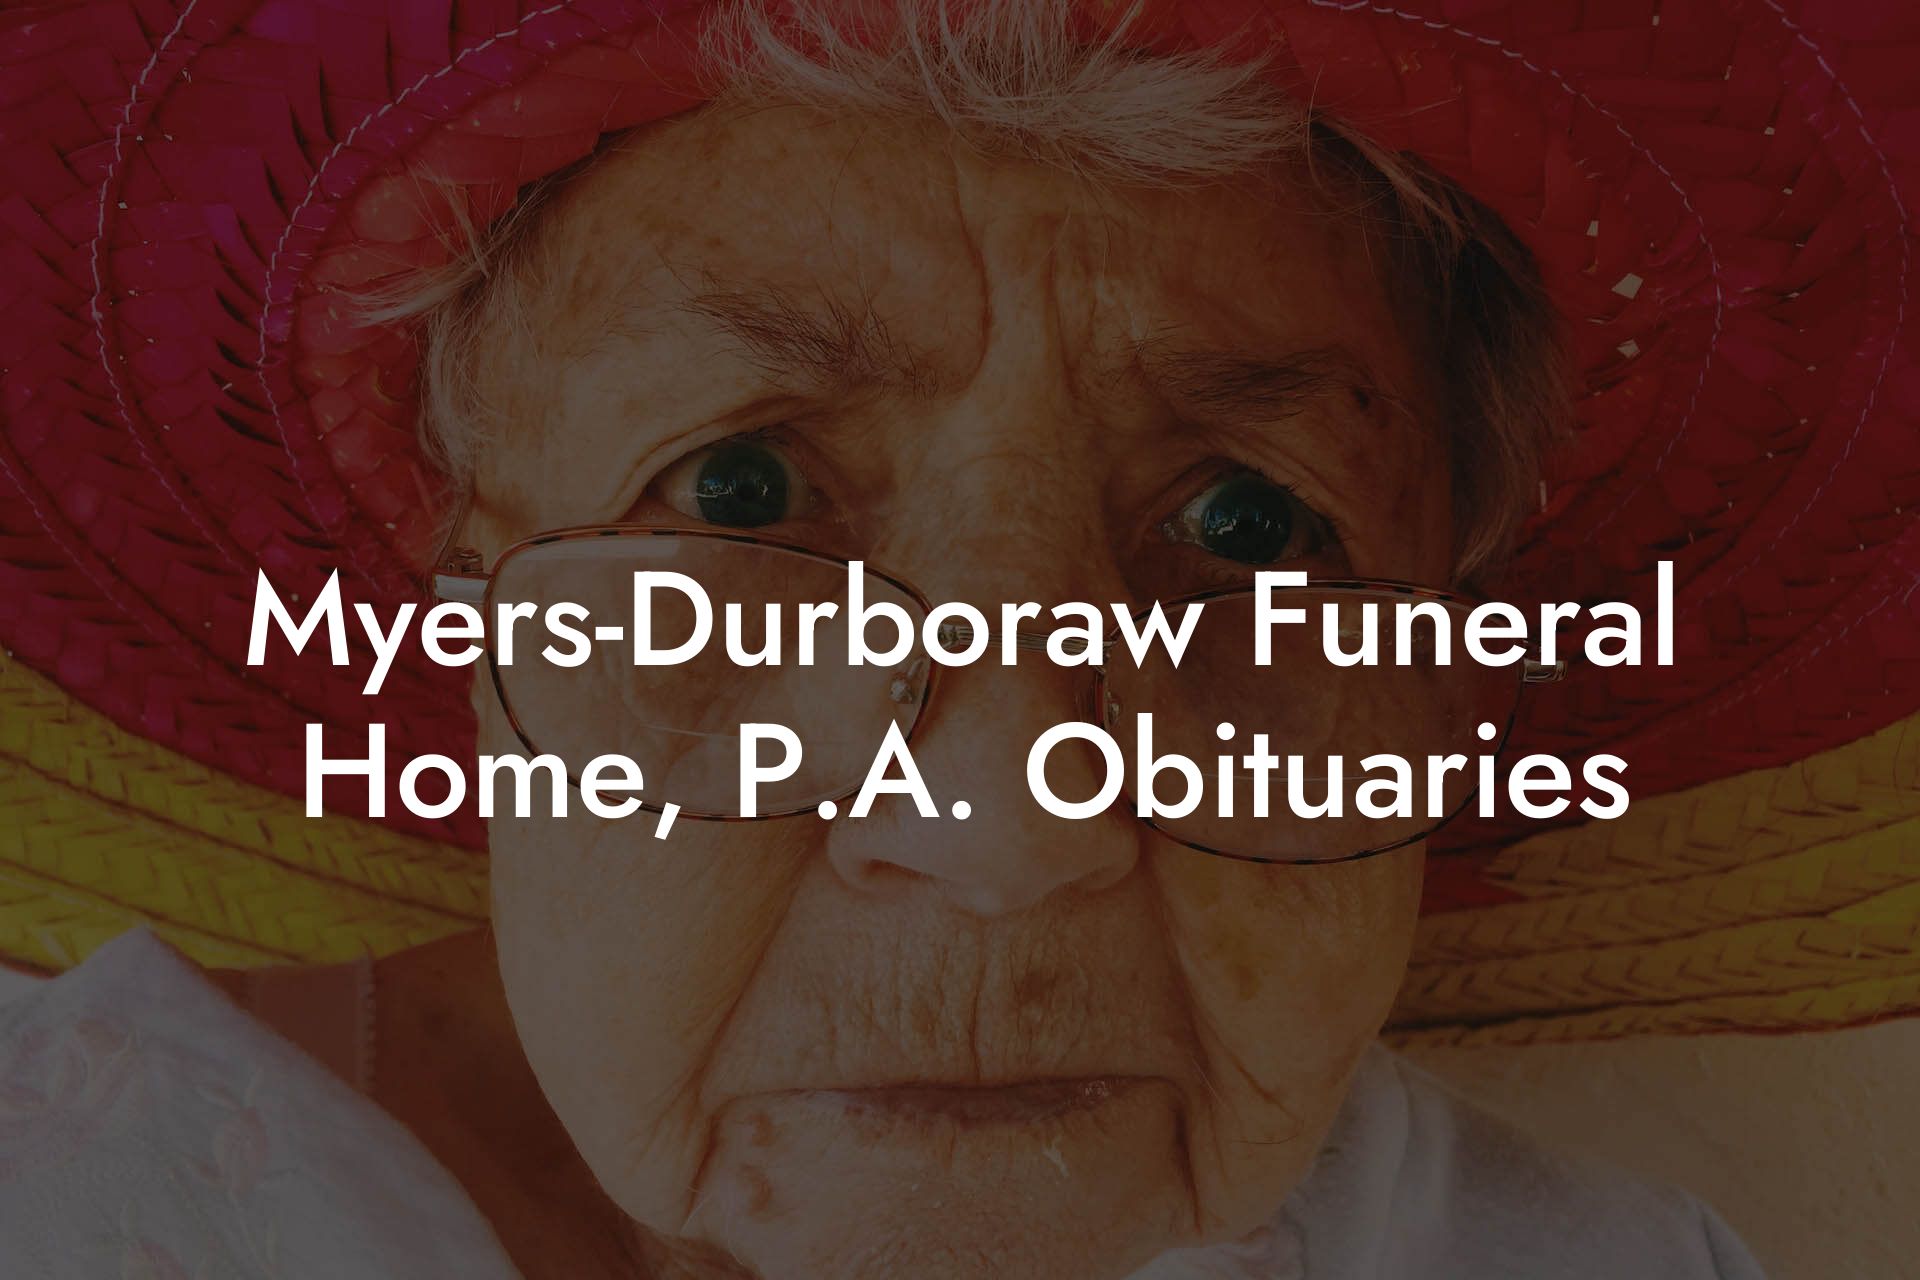 Myers-Durboraw Funeral Home, P.A. Obituaries